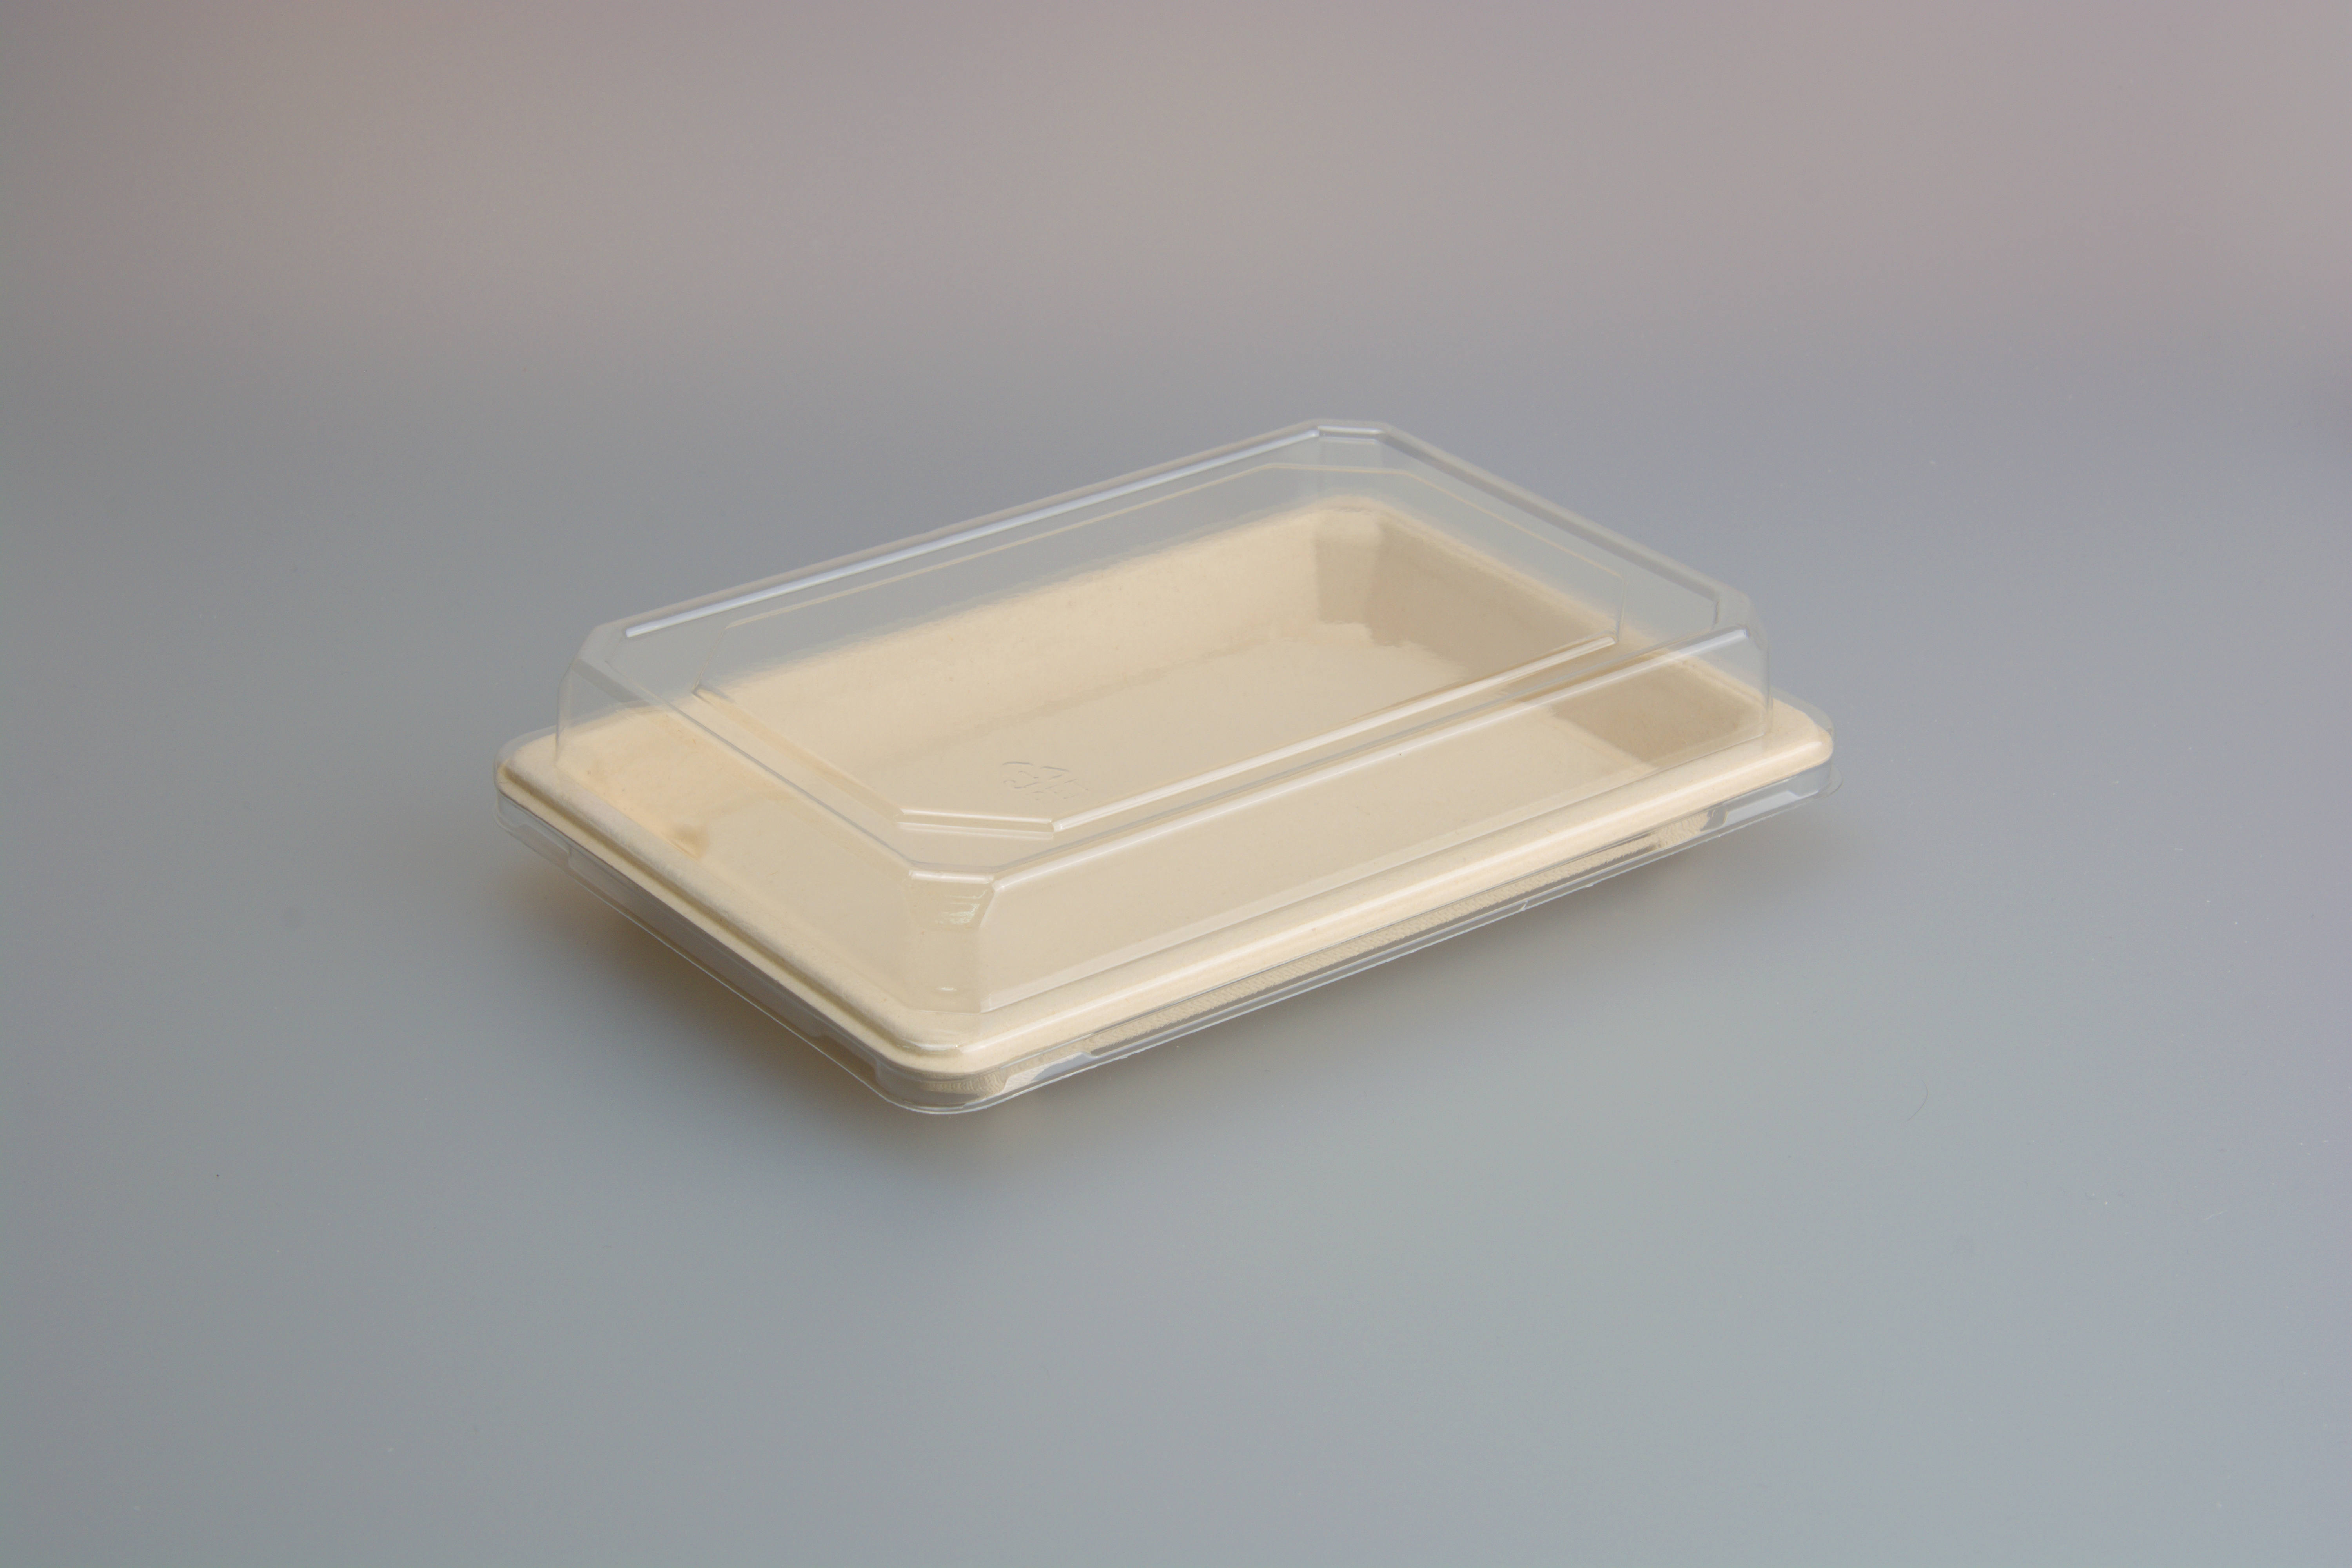 Cheapest Price Disposable 5 Compartment Biodegradable Sugarcane - 7.3*5.0 INCH Sushi Trays, Disposable Sushi Containers With Lids – Short, Take Out Containers For Appetizers, Entrees, or Des...